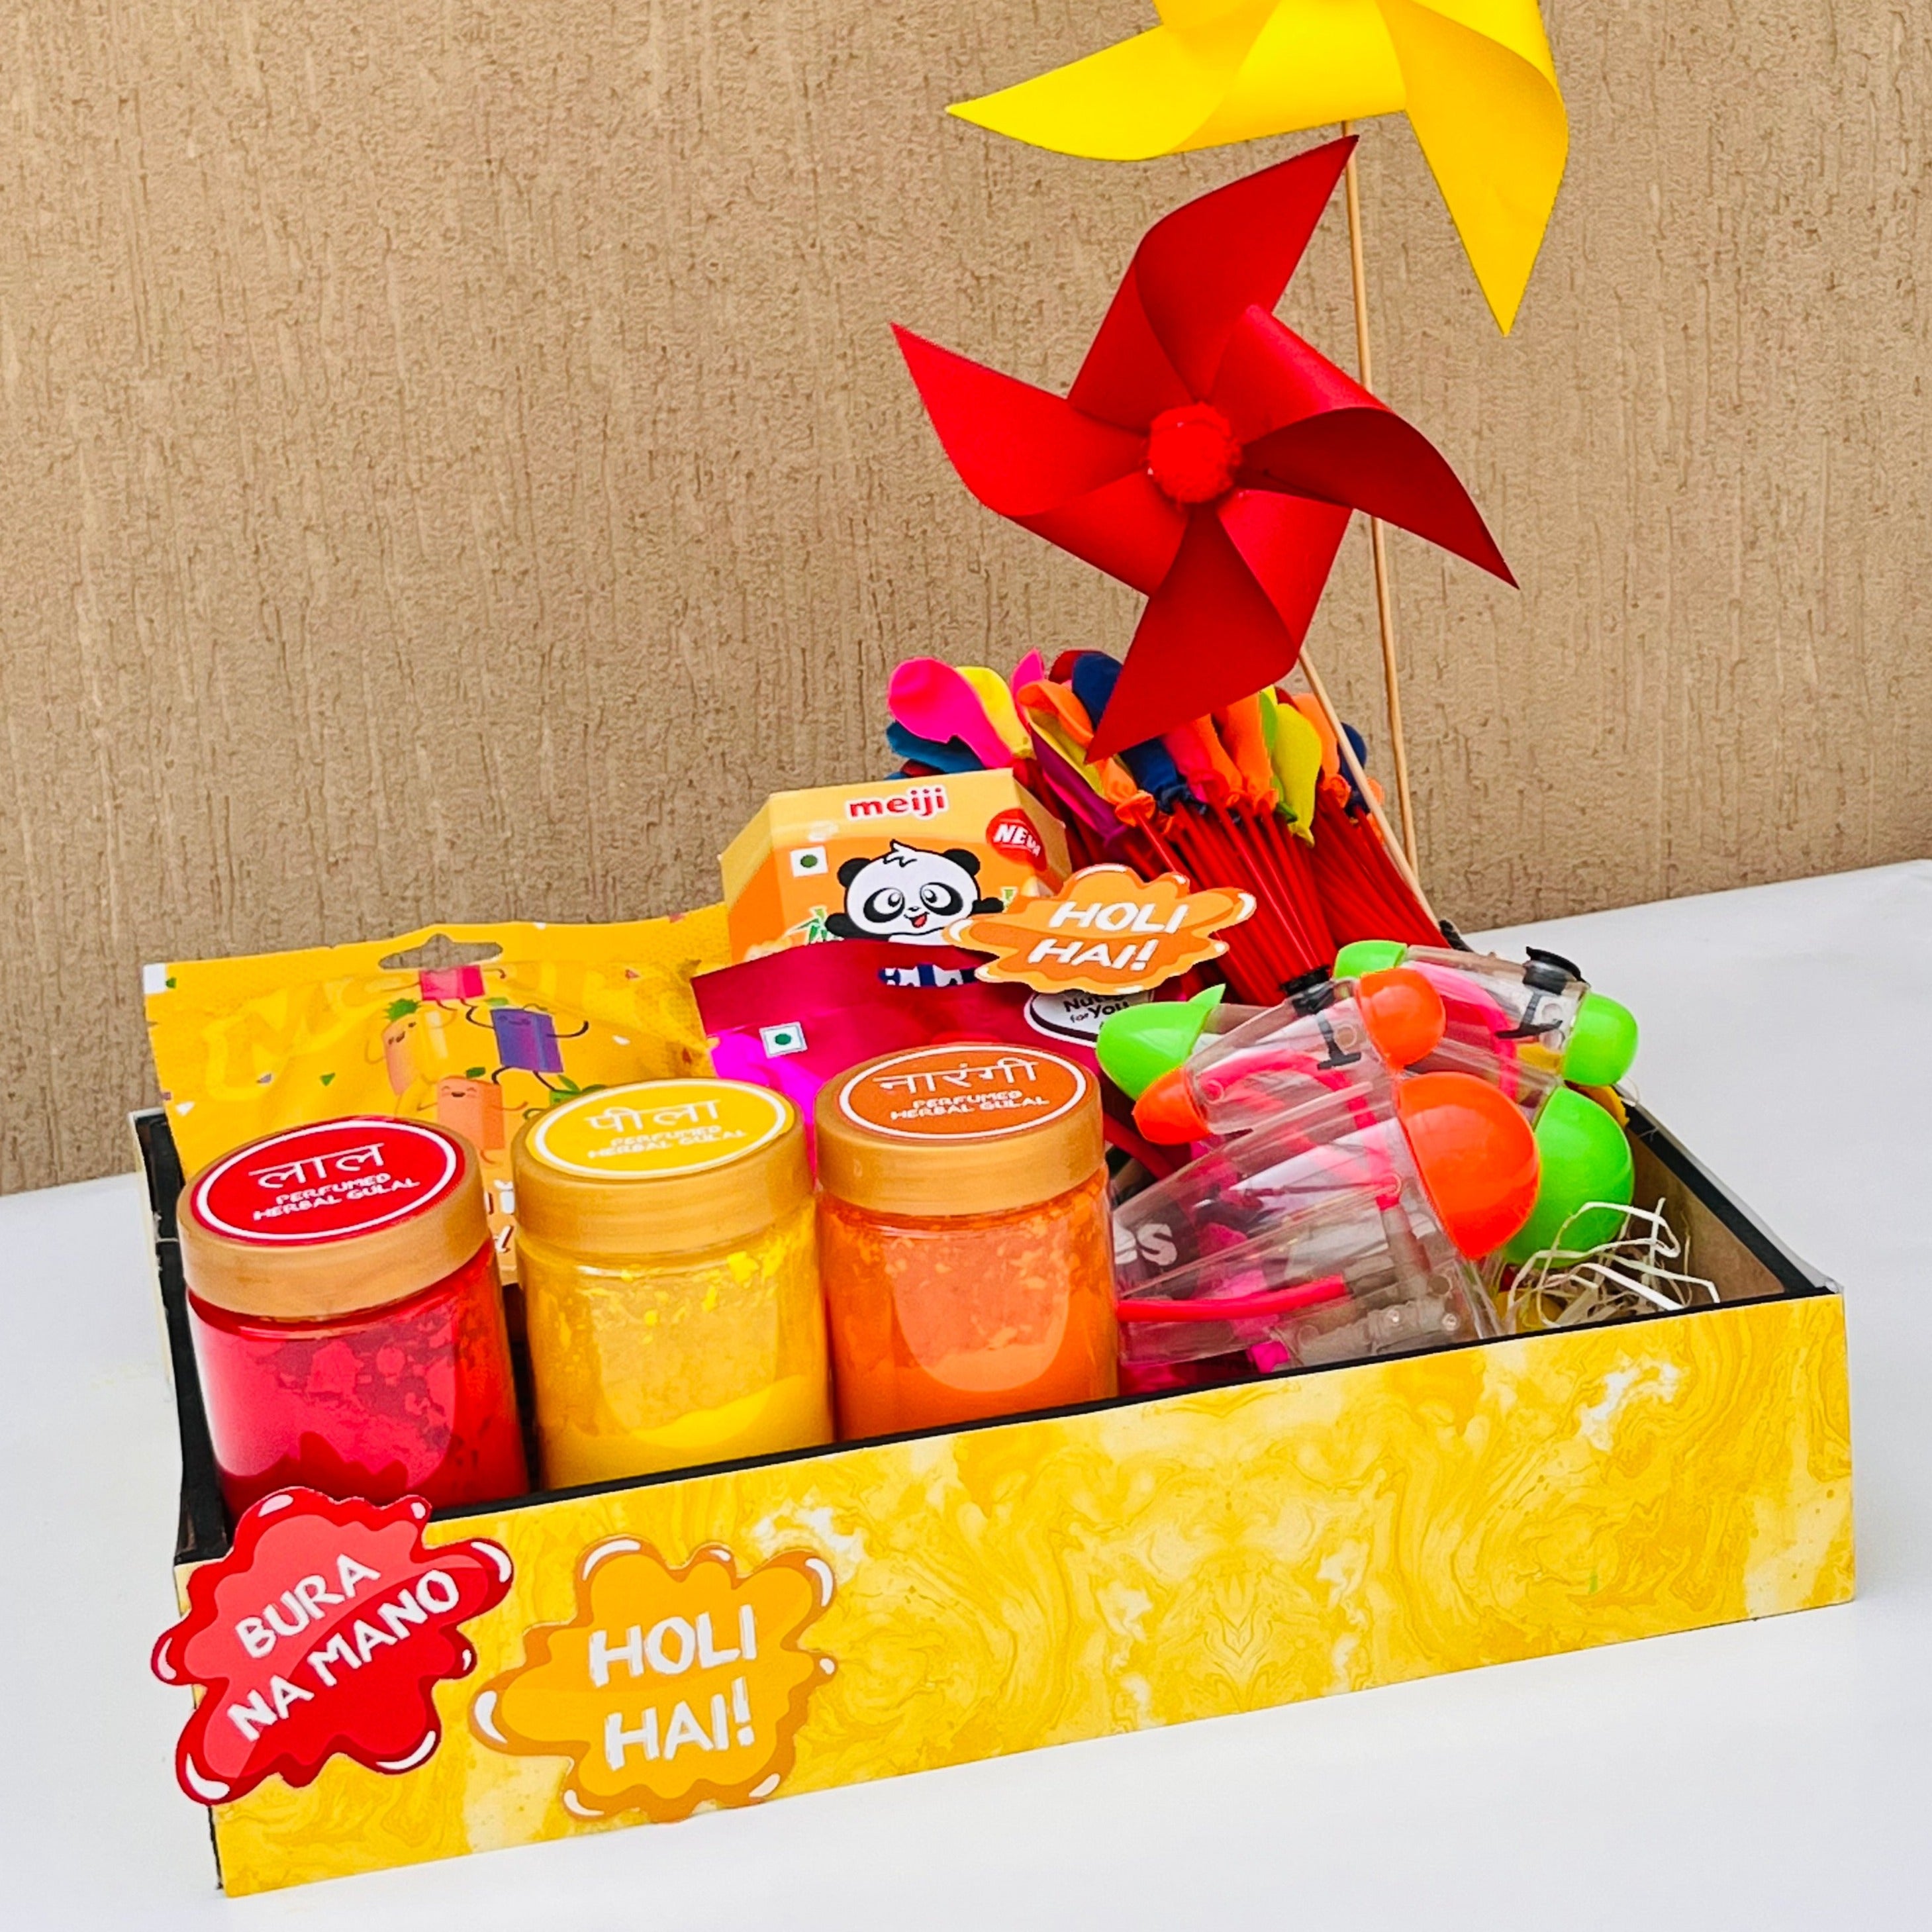 Celebrate Holi with Joy & Happiness, Send Holi Gifts and Sweets Online